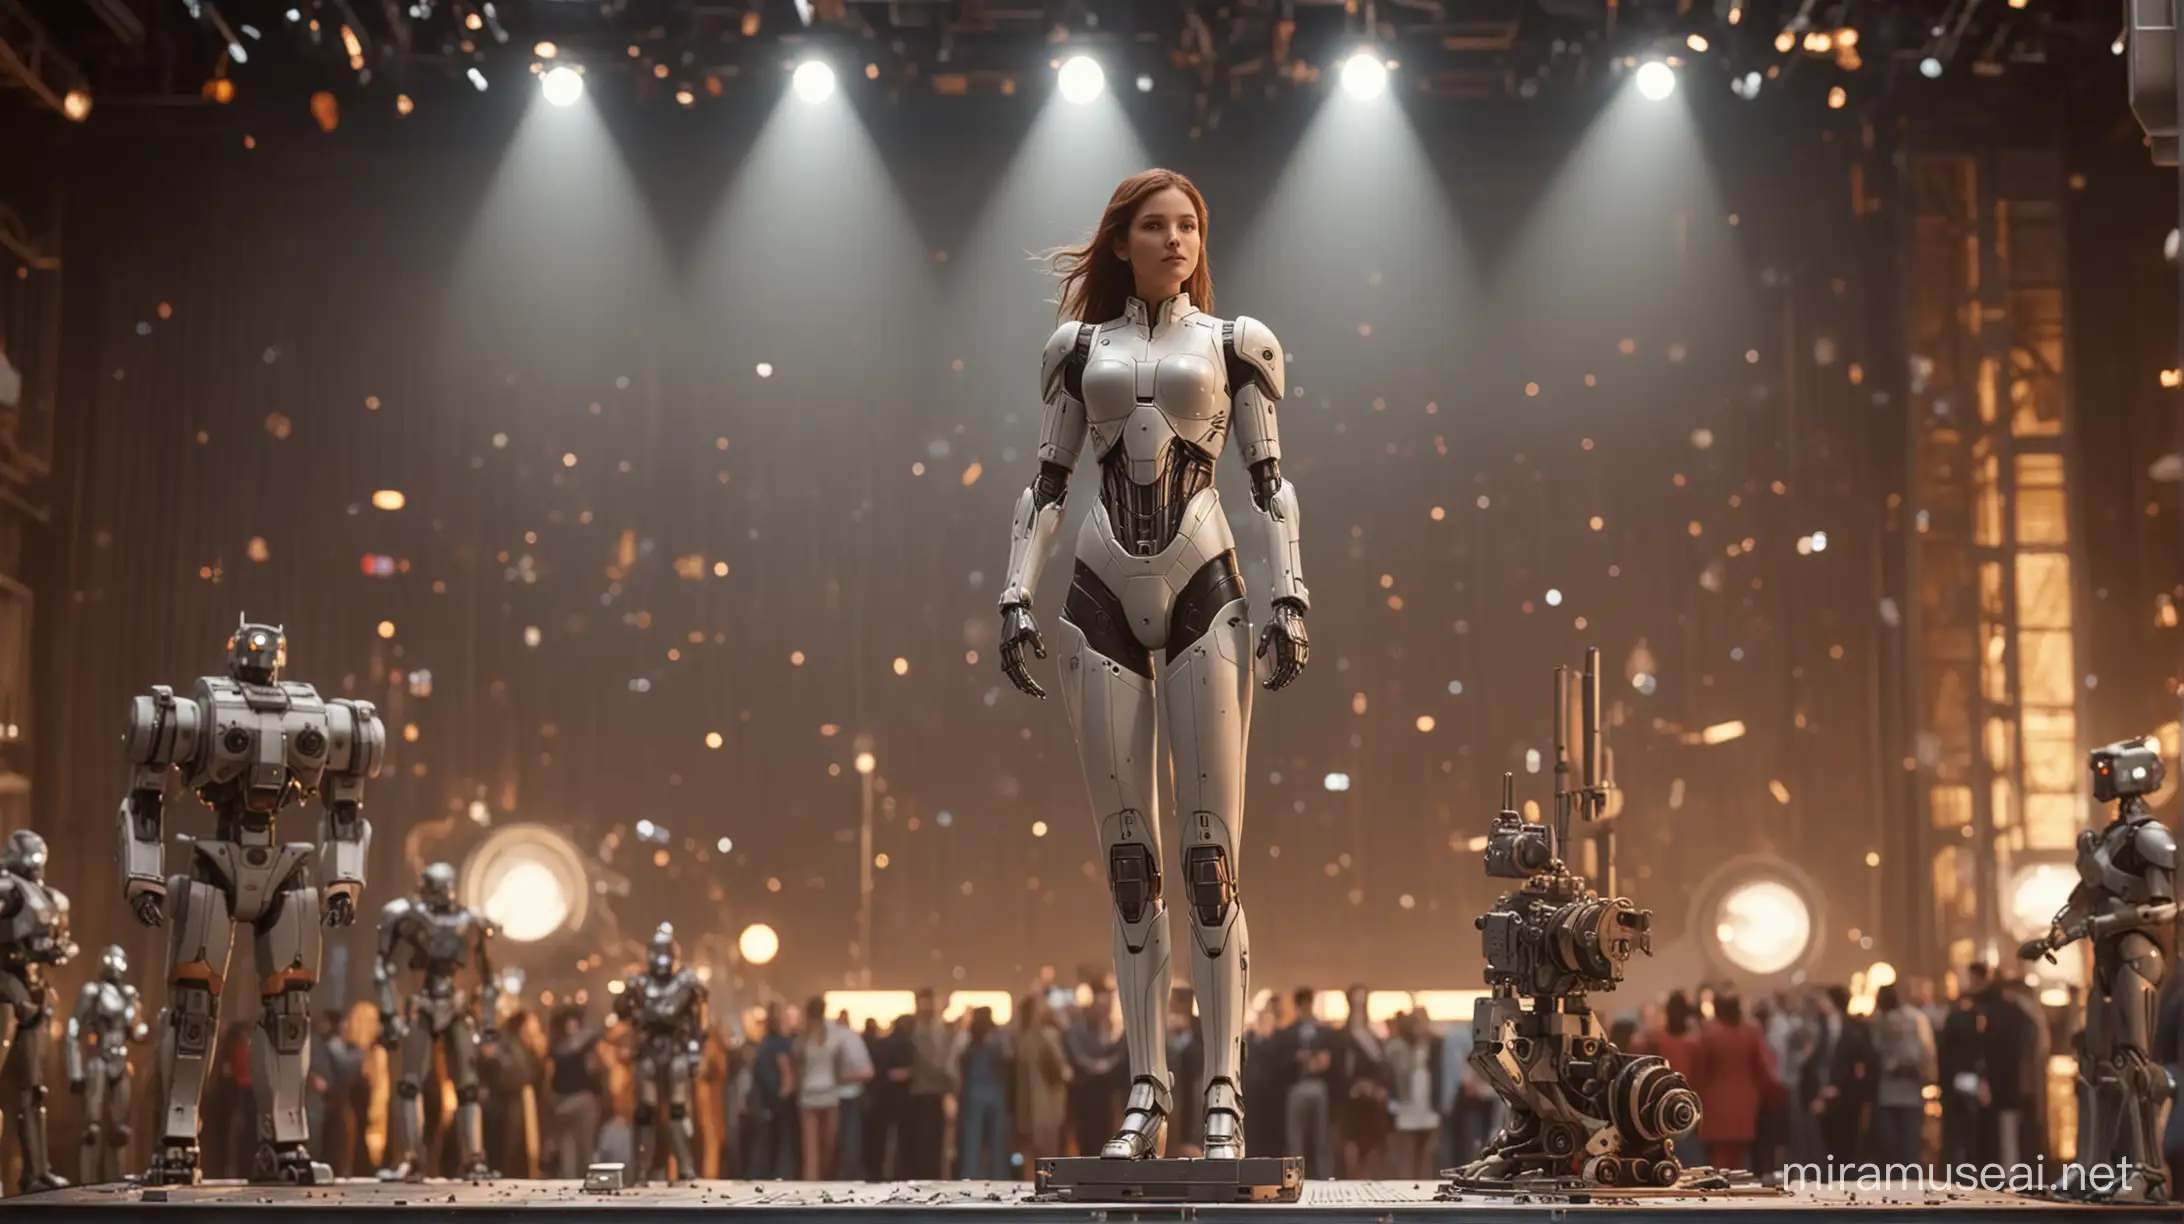 film photography, light fabric, using a 35mm lens, f/2, HD, Bokeh, Intricately detailed, film, grain, Idol, beautiful girl standing on a podium, behind in the background a small mech is being assembled, sci-fi themed backdrop, photo